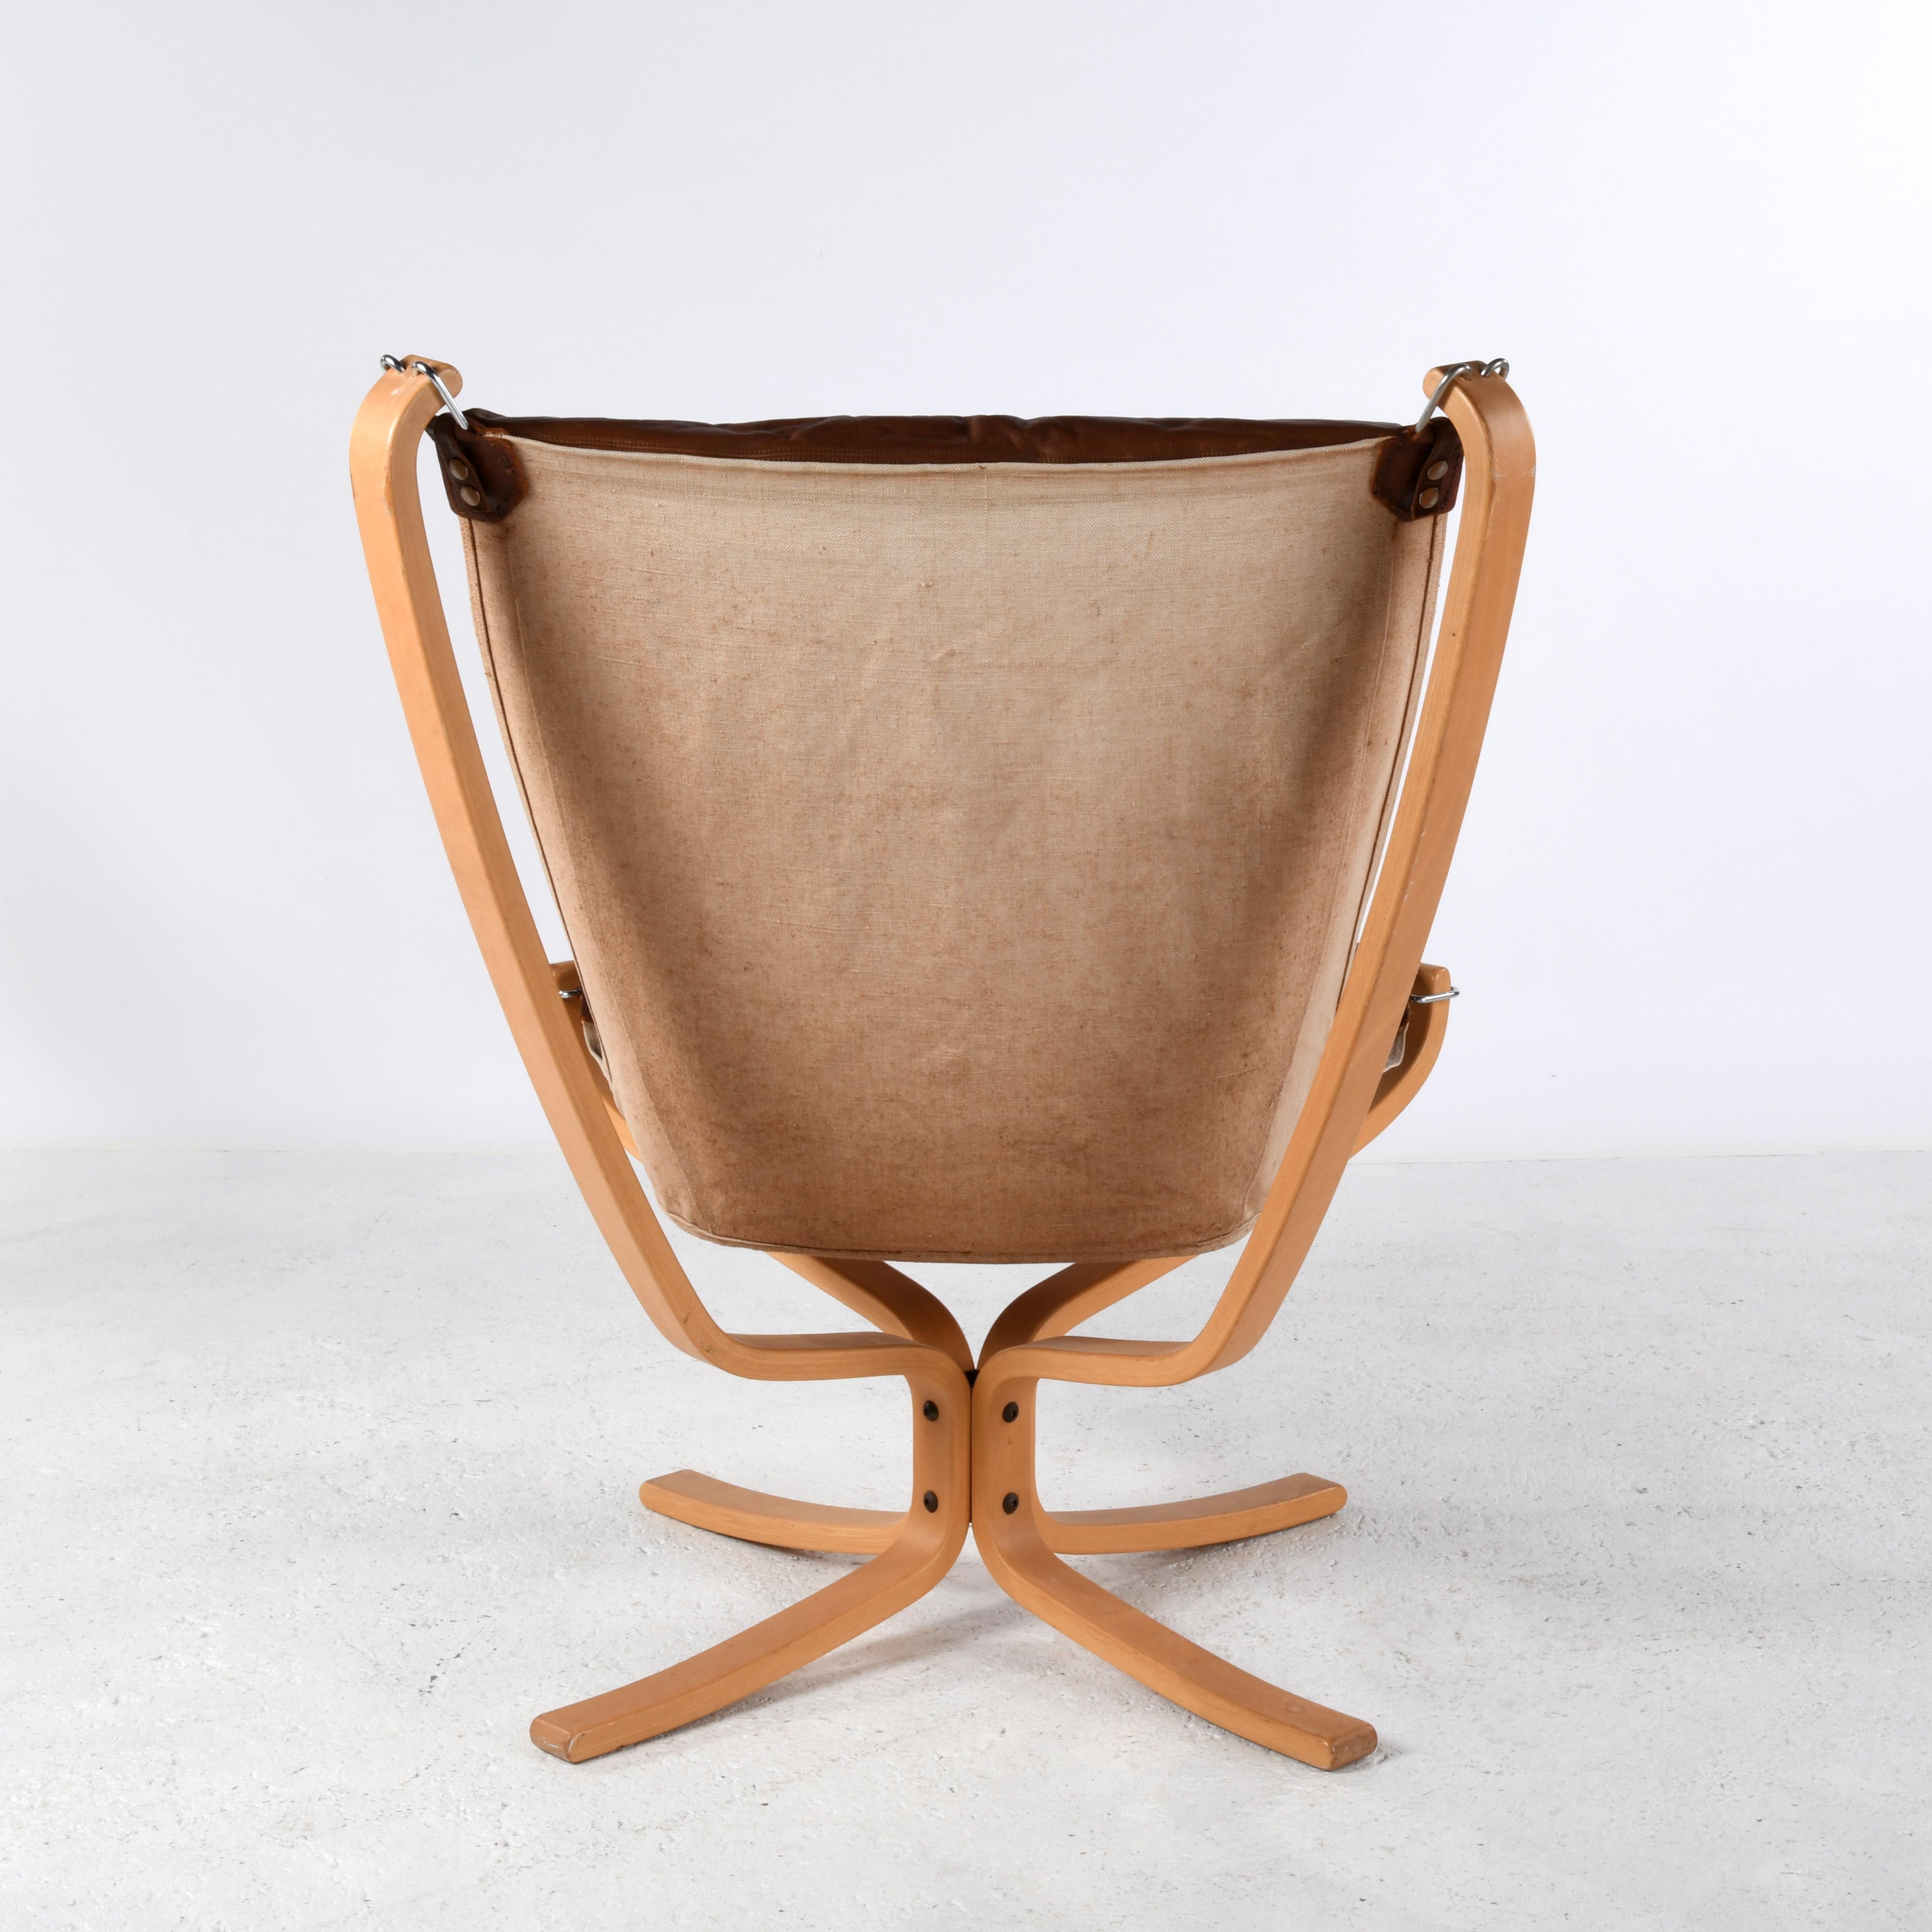 Scandinavian Modern Falcon chair, design Sigurd Ressell, wood and brown leather version